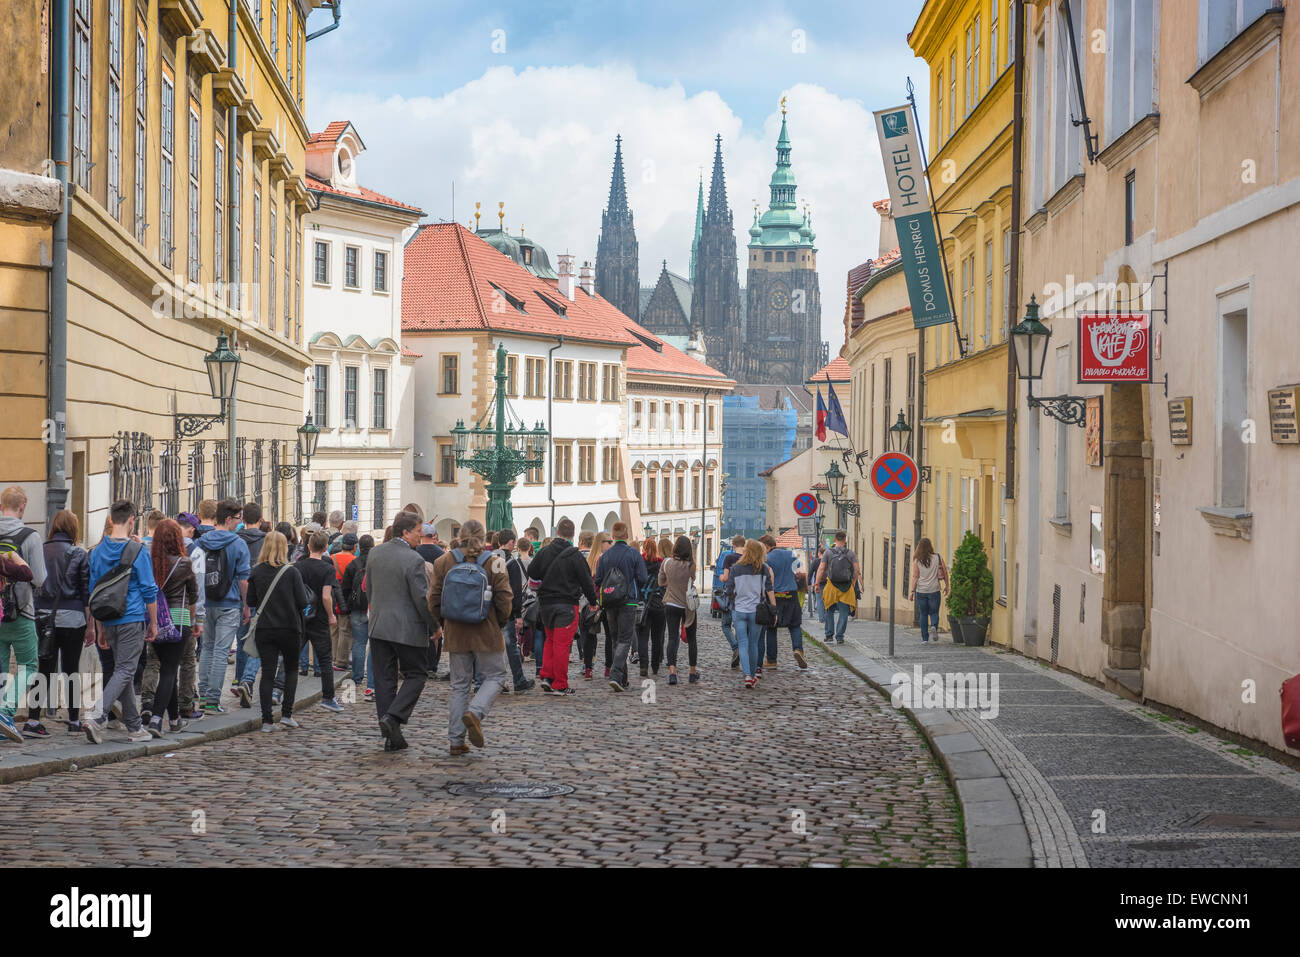 Prague Hradcany, view along Uvoz in the Hradcany district of Prague as a group of tourists head for the landmark St. Vitus Cathedral, Czech Republic. Stock Photo